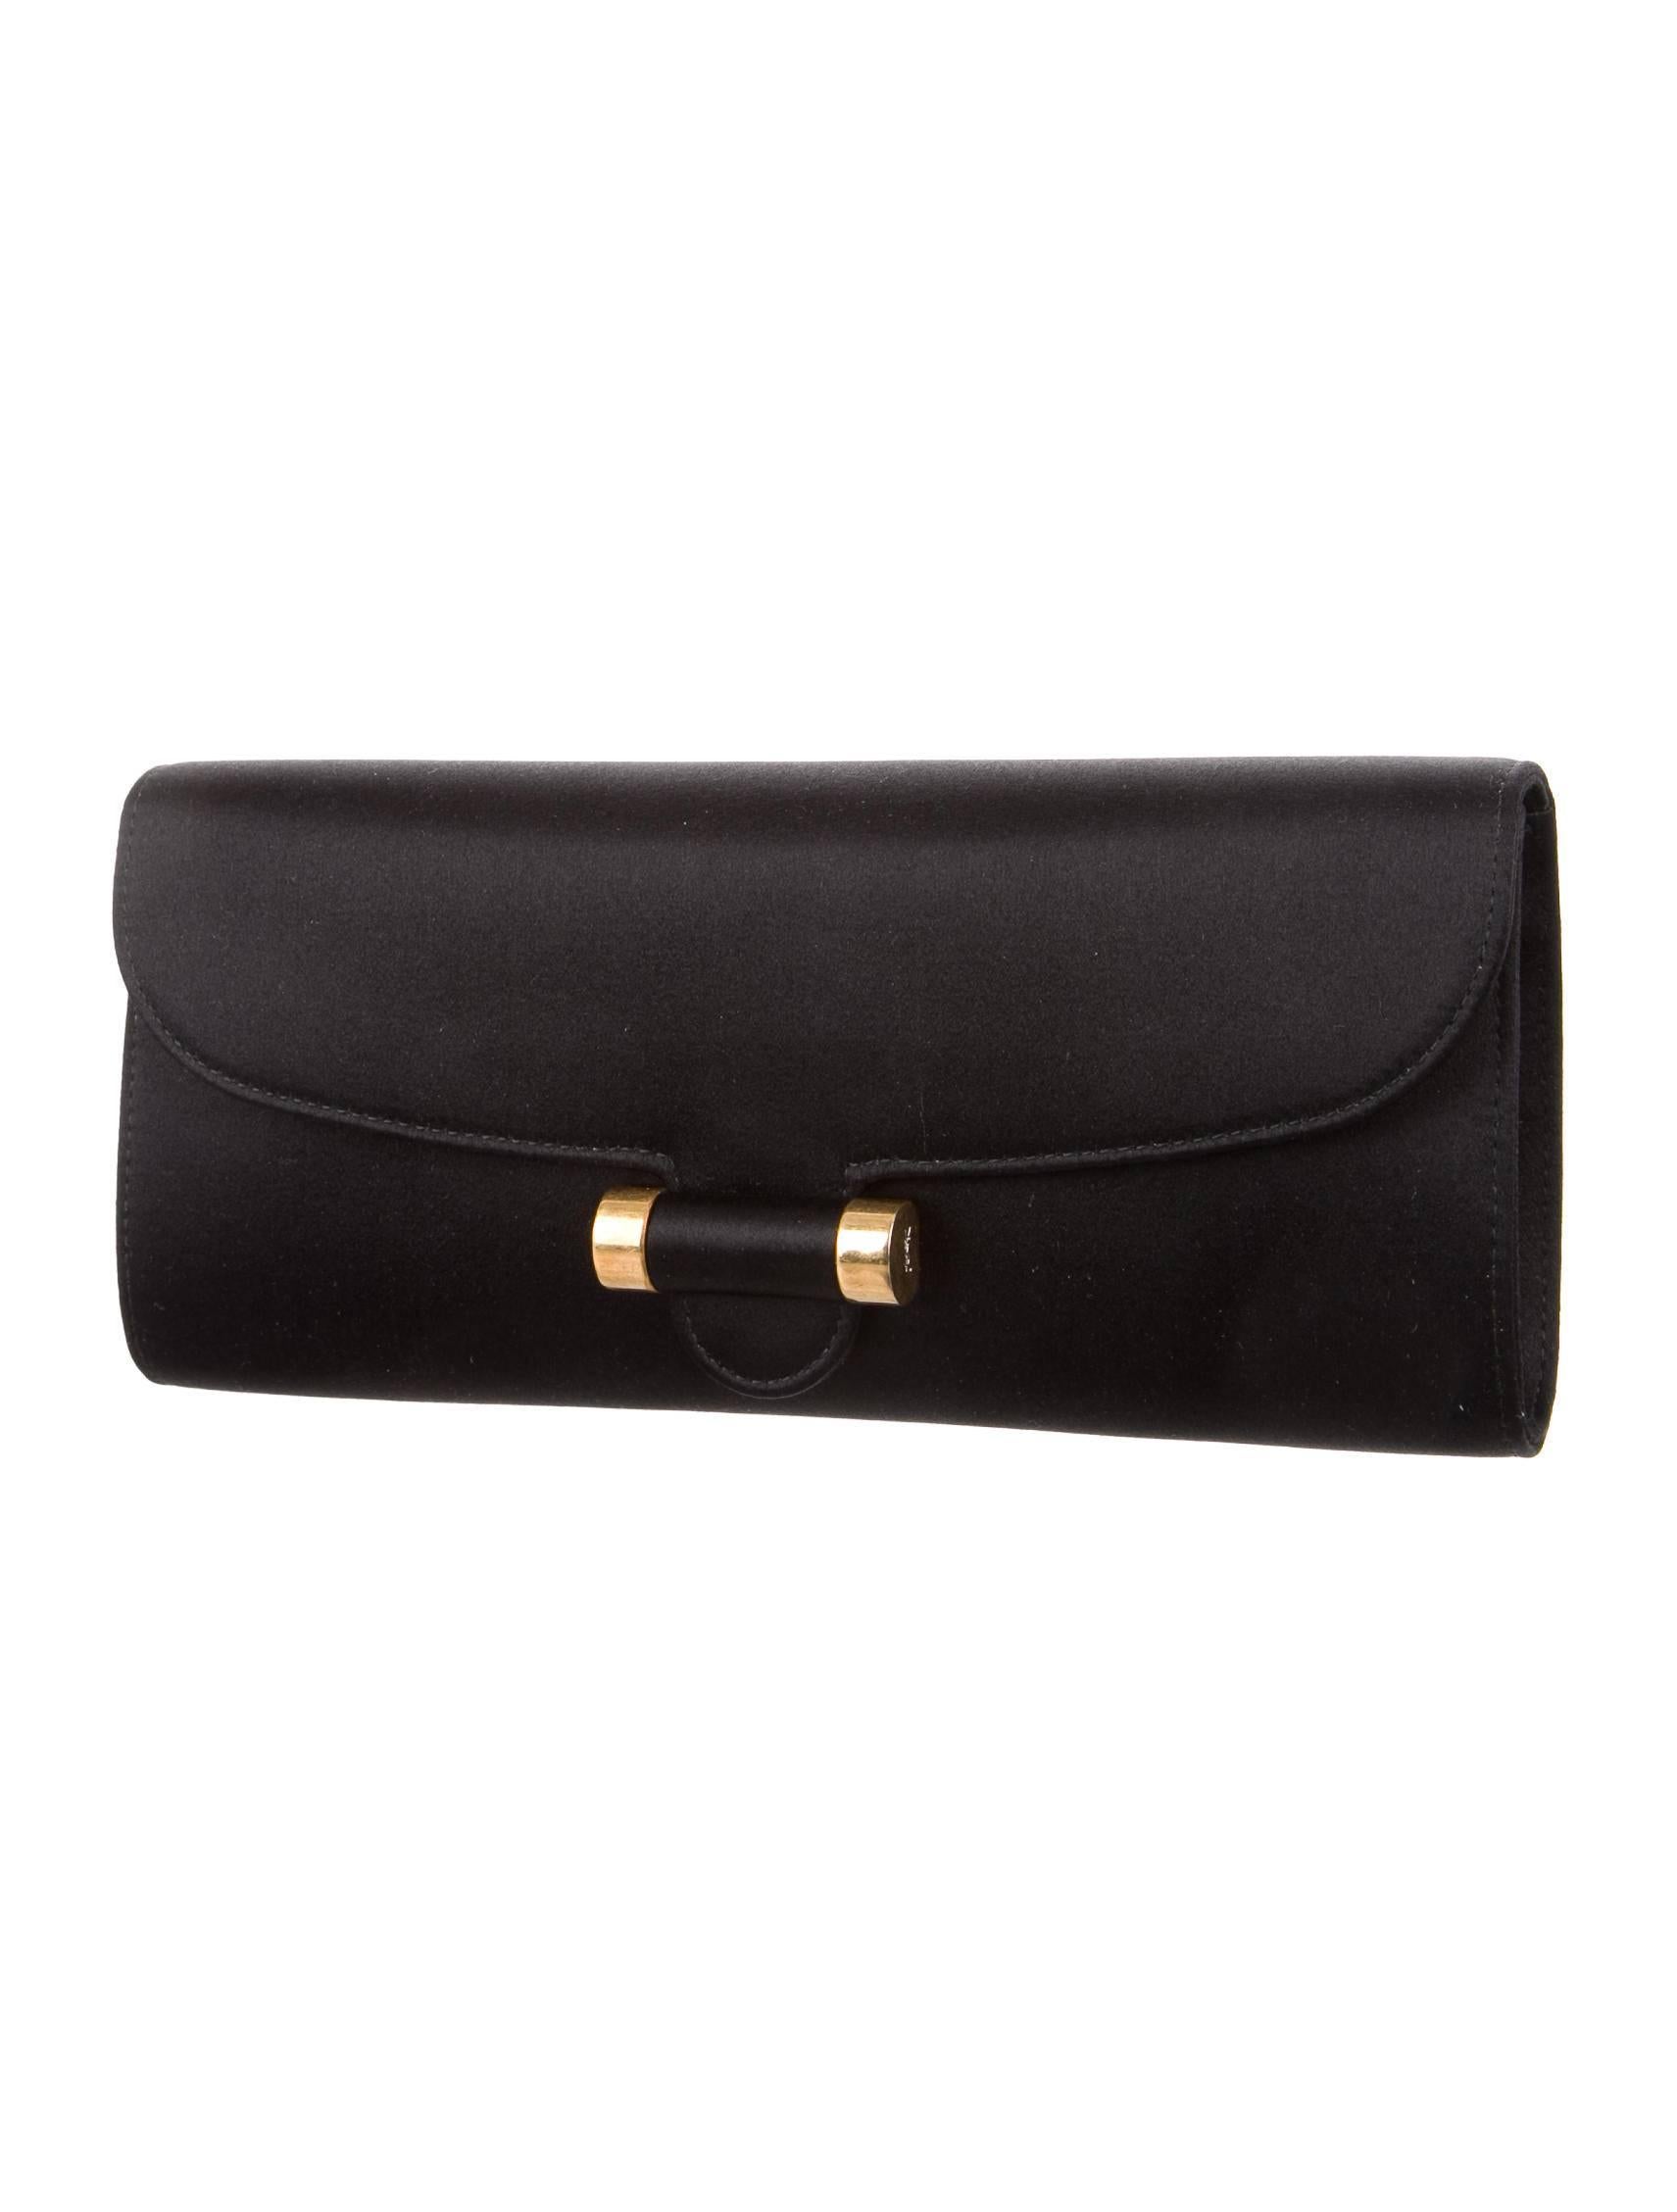 CURATOR'S NOTES

Satin 
Gold tone hardware
Satin lining
Fold-in flap closure 
Measures 9.25" W x 4" H x 1' D 
Includes original Yves Saint Laurent dust bag

Shop Newfound Luxury for authentic Yves Saint Laurent clutch flap bags.